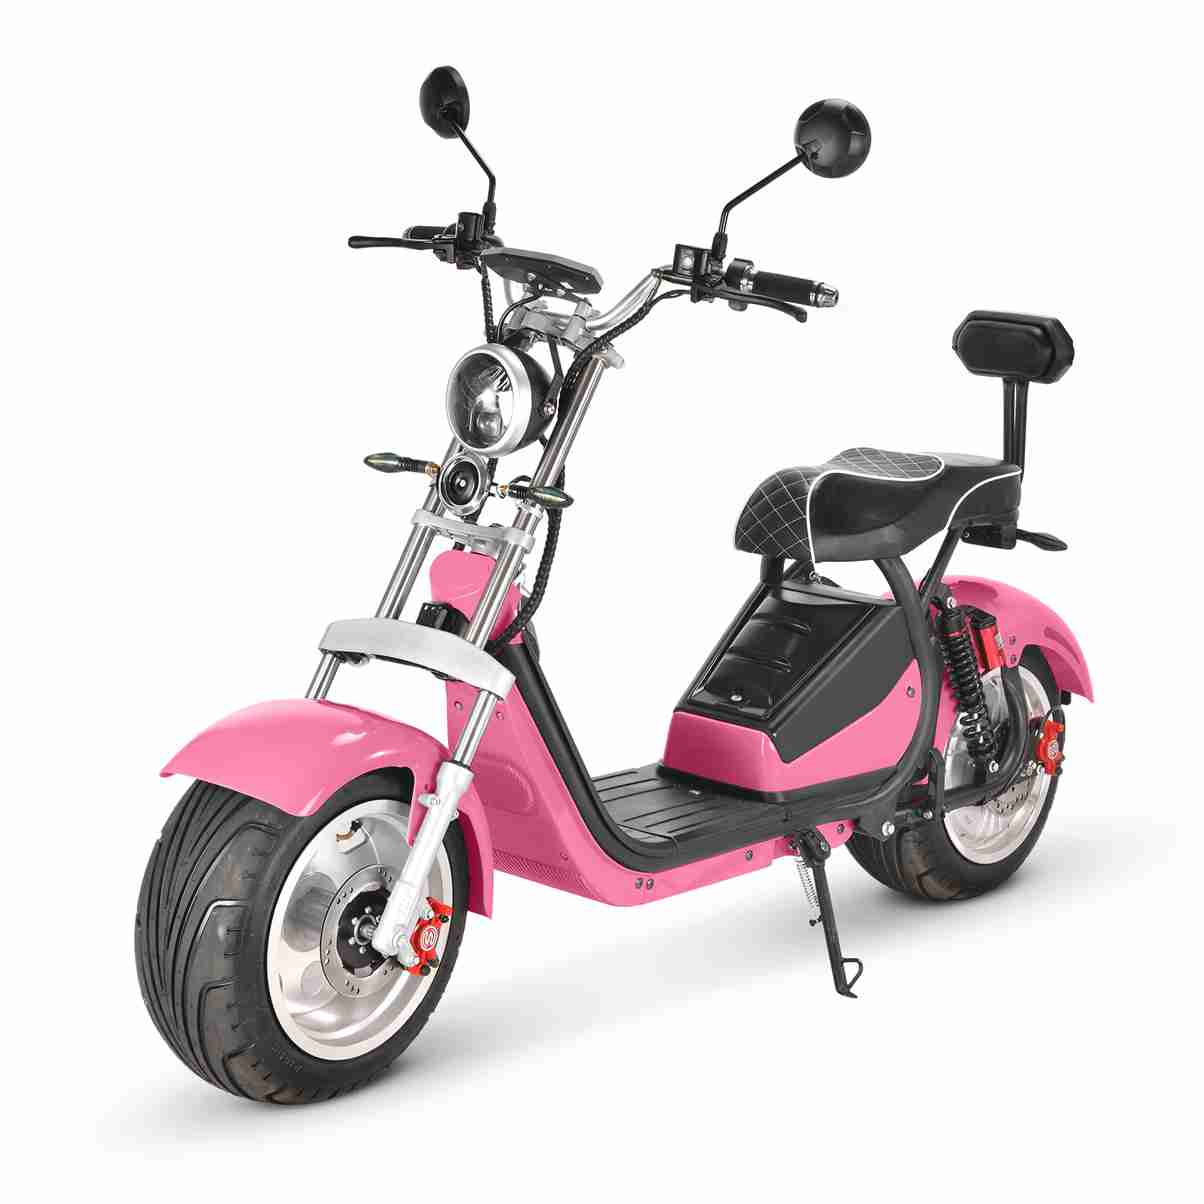 Scooter Power wholesale price